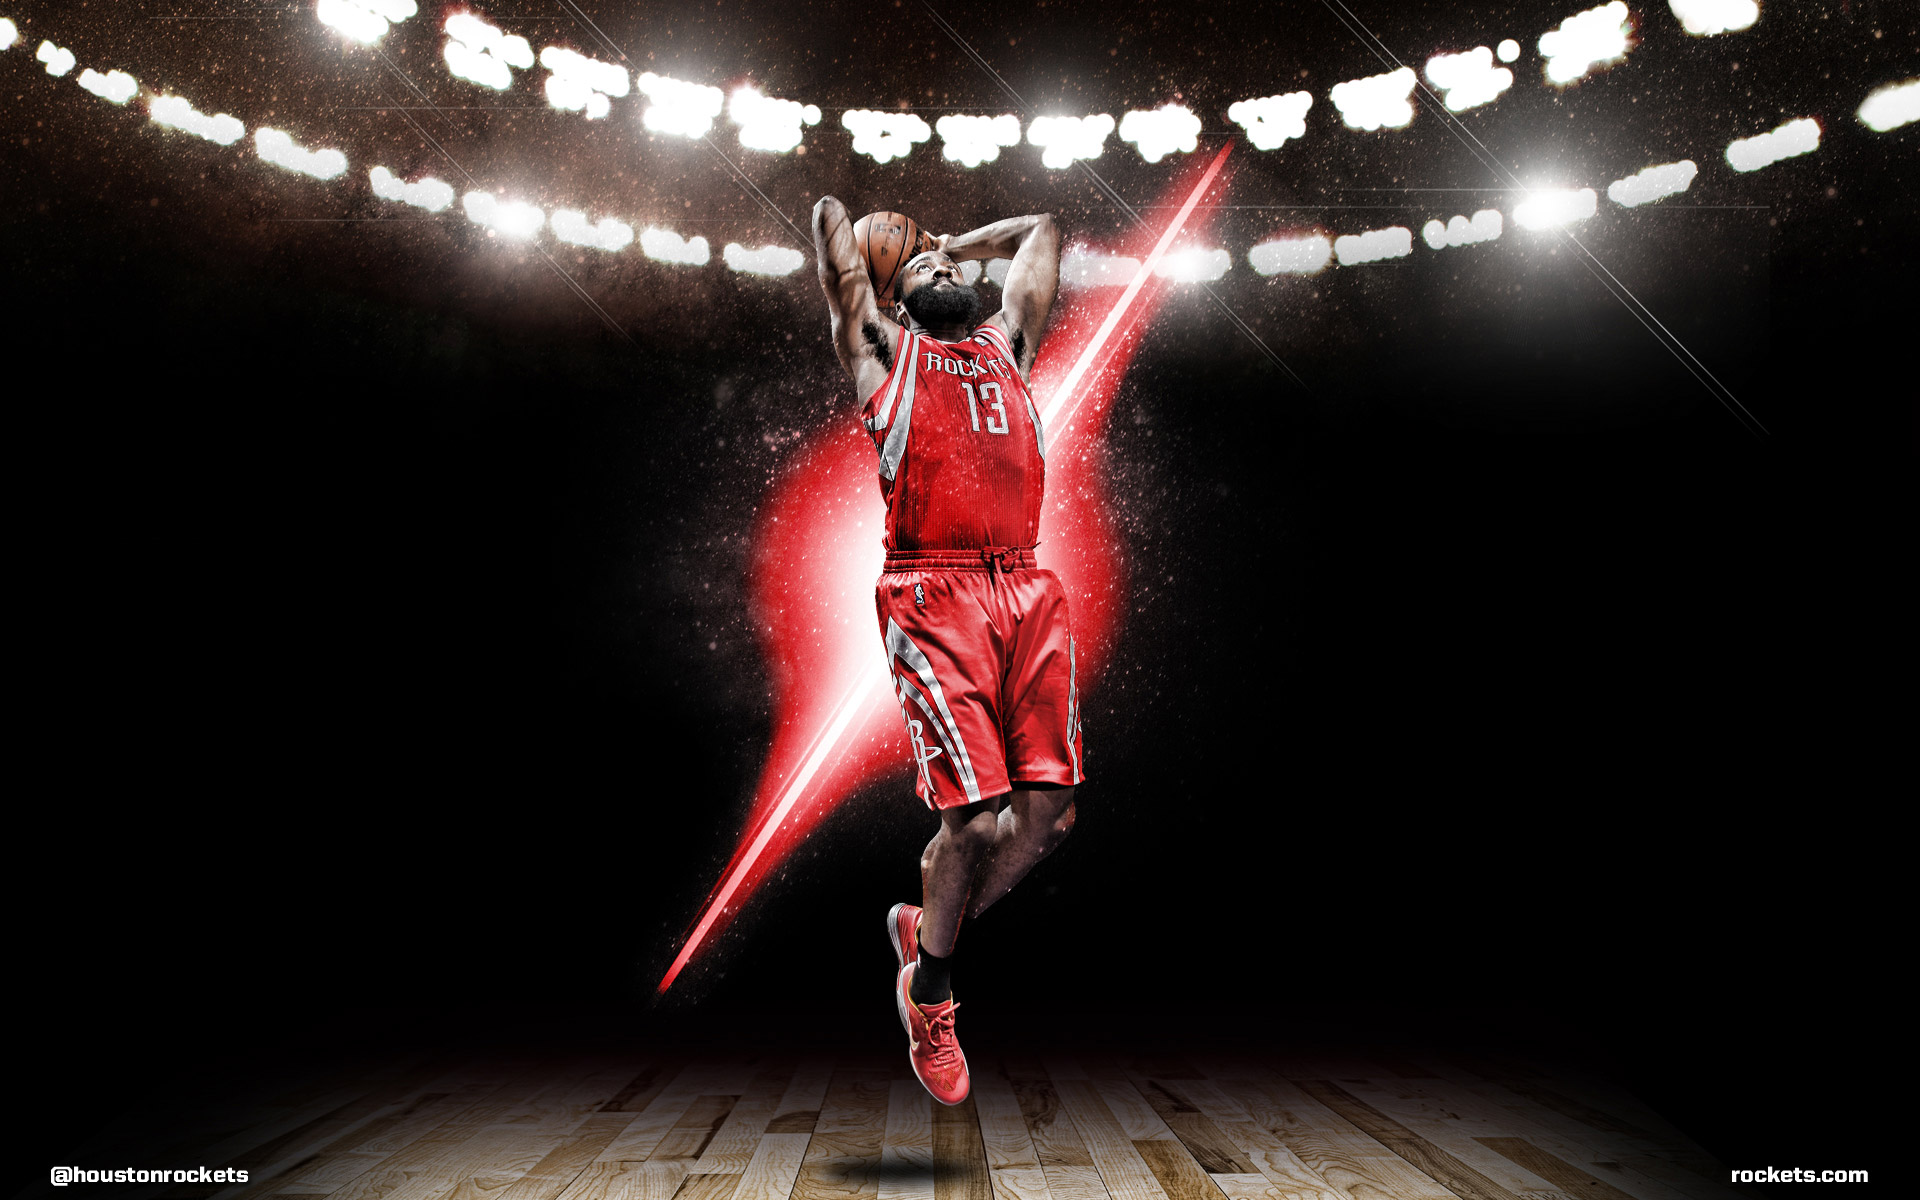 James Harden Wallpapers | Basketball Wallpapers at BasketWallpapers.com1920 x 1200